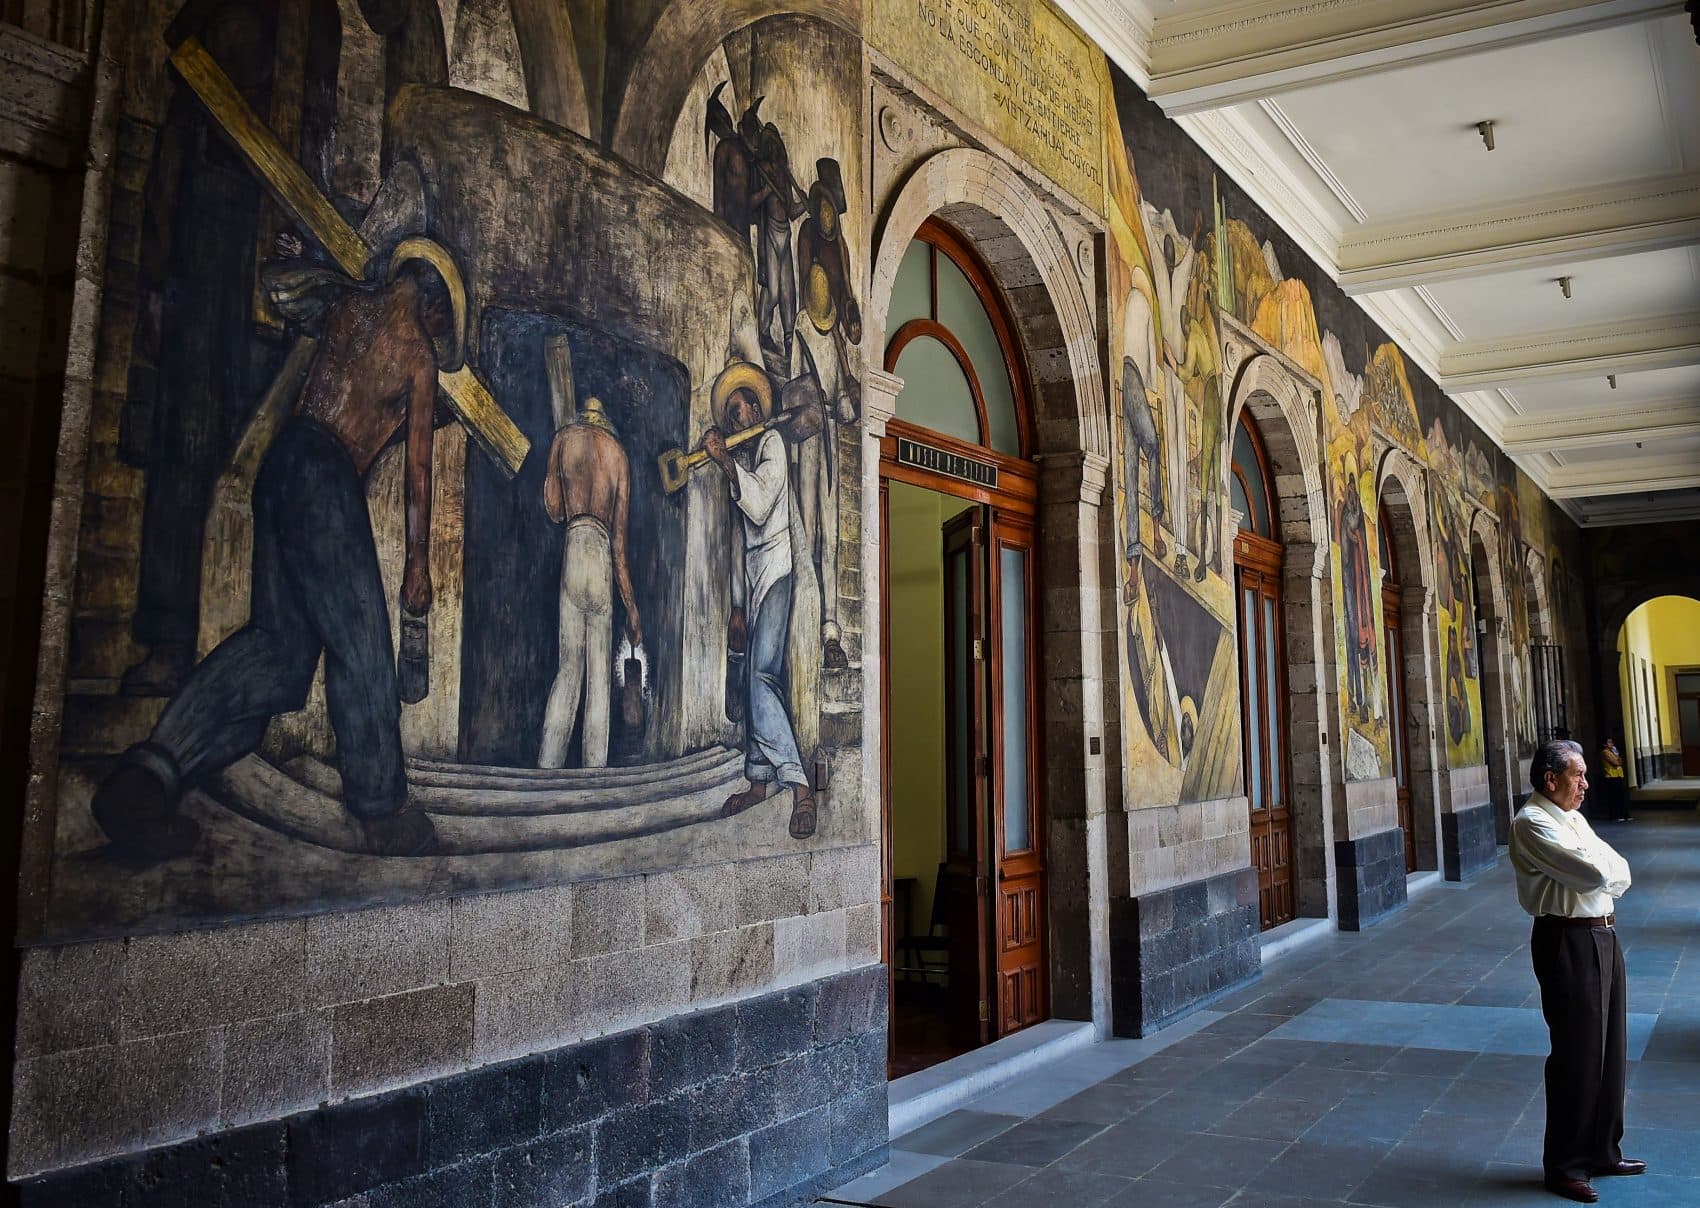 A man stands next to murals by Mexican artist Diego Rivera in the Education Secretariat in Mexico City on April, 6, 2017. Rivera was the most visible figure in Mexican muralism, a large-scale public art initiative that emerged in the 1920s in the wake of the Mexican Revolution. (Ronaldo Schemidt/AFP/Getty Images)